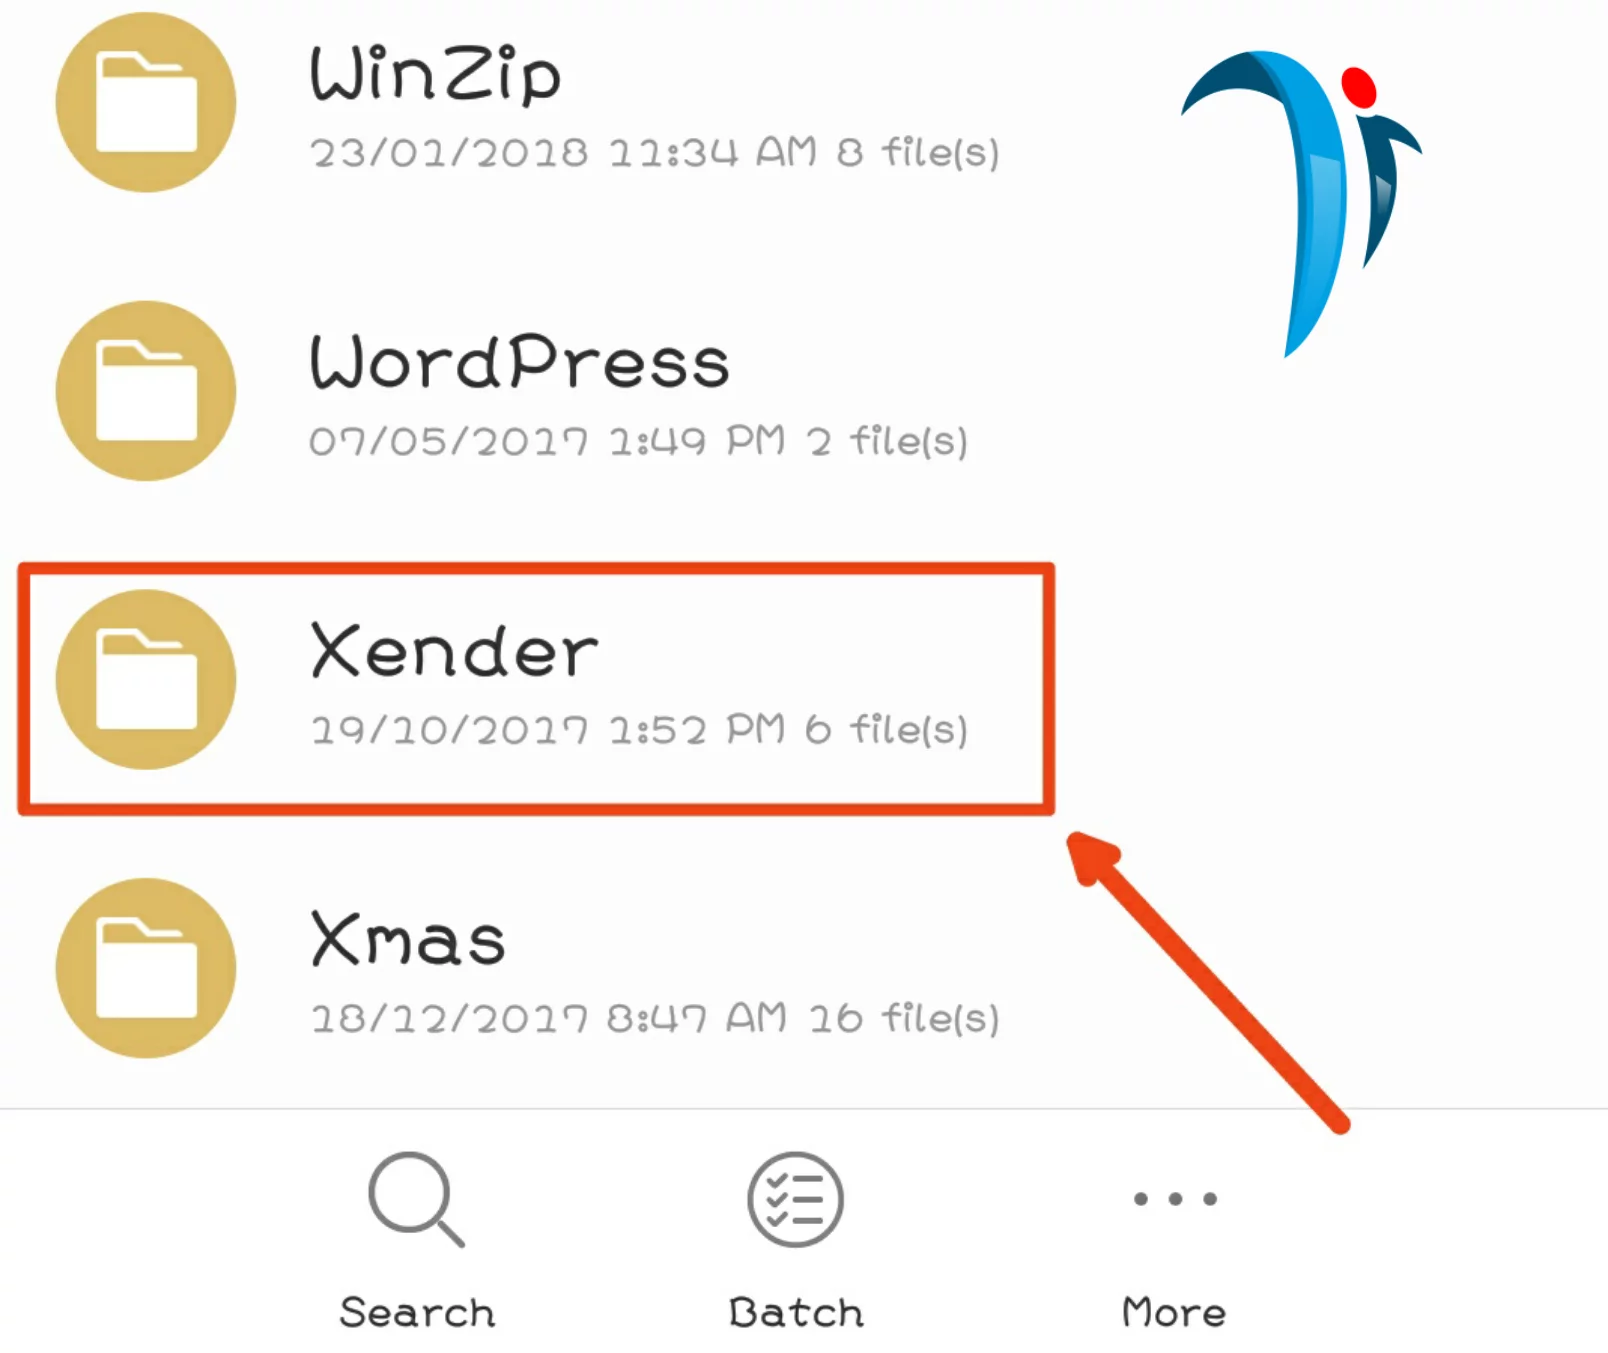 Where does a file go when it is received via Xender